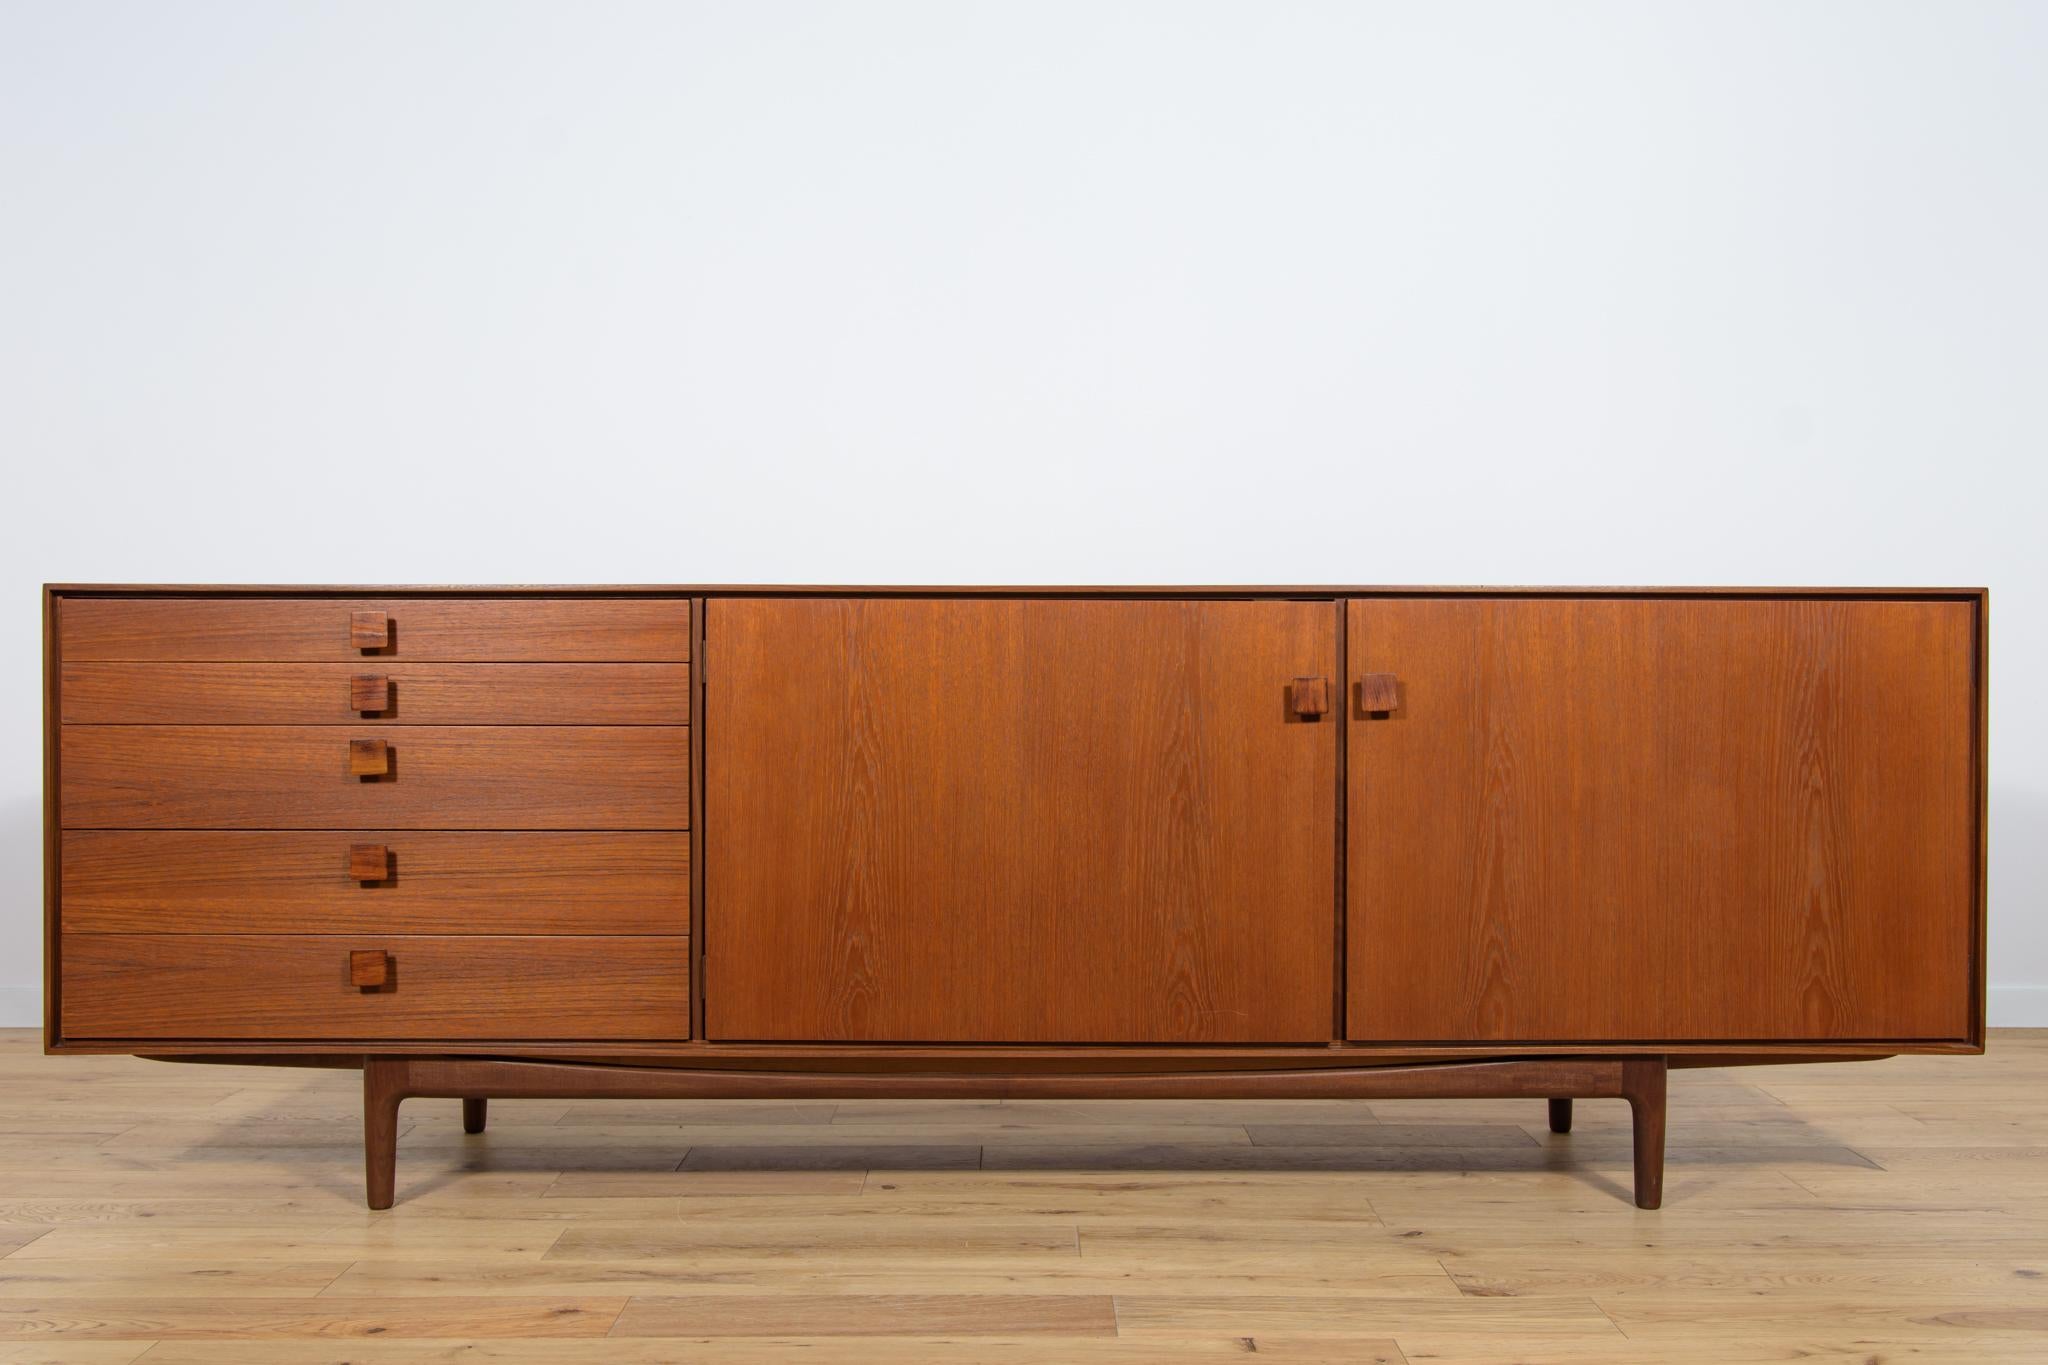 British Mid-Century Sideboard by Ib Kofod Larsen for G-Plan, 1960s For Sale